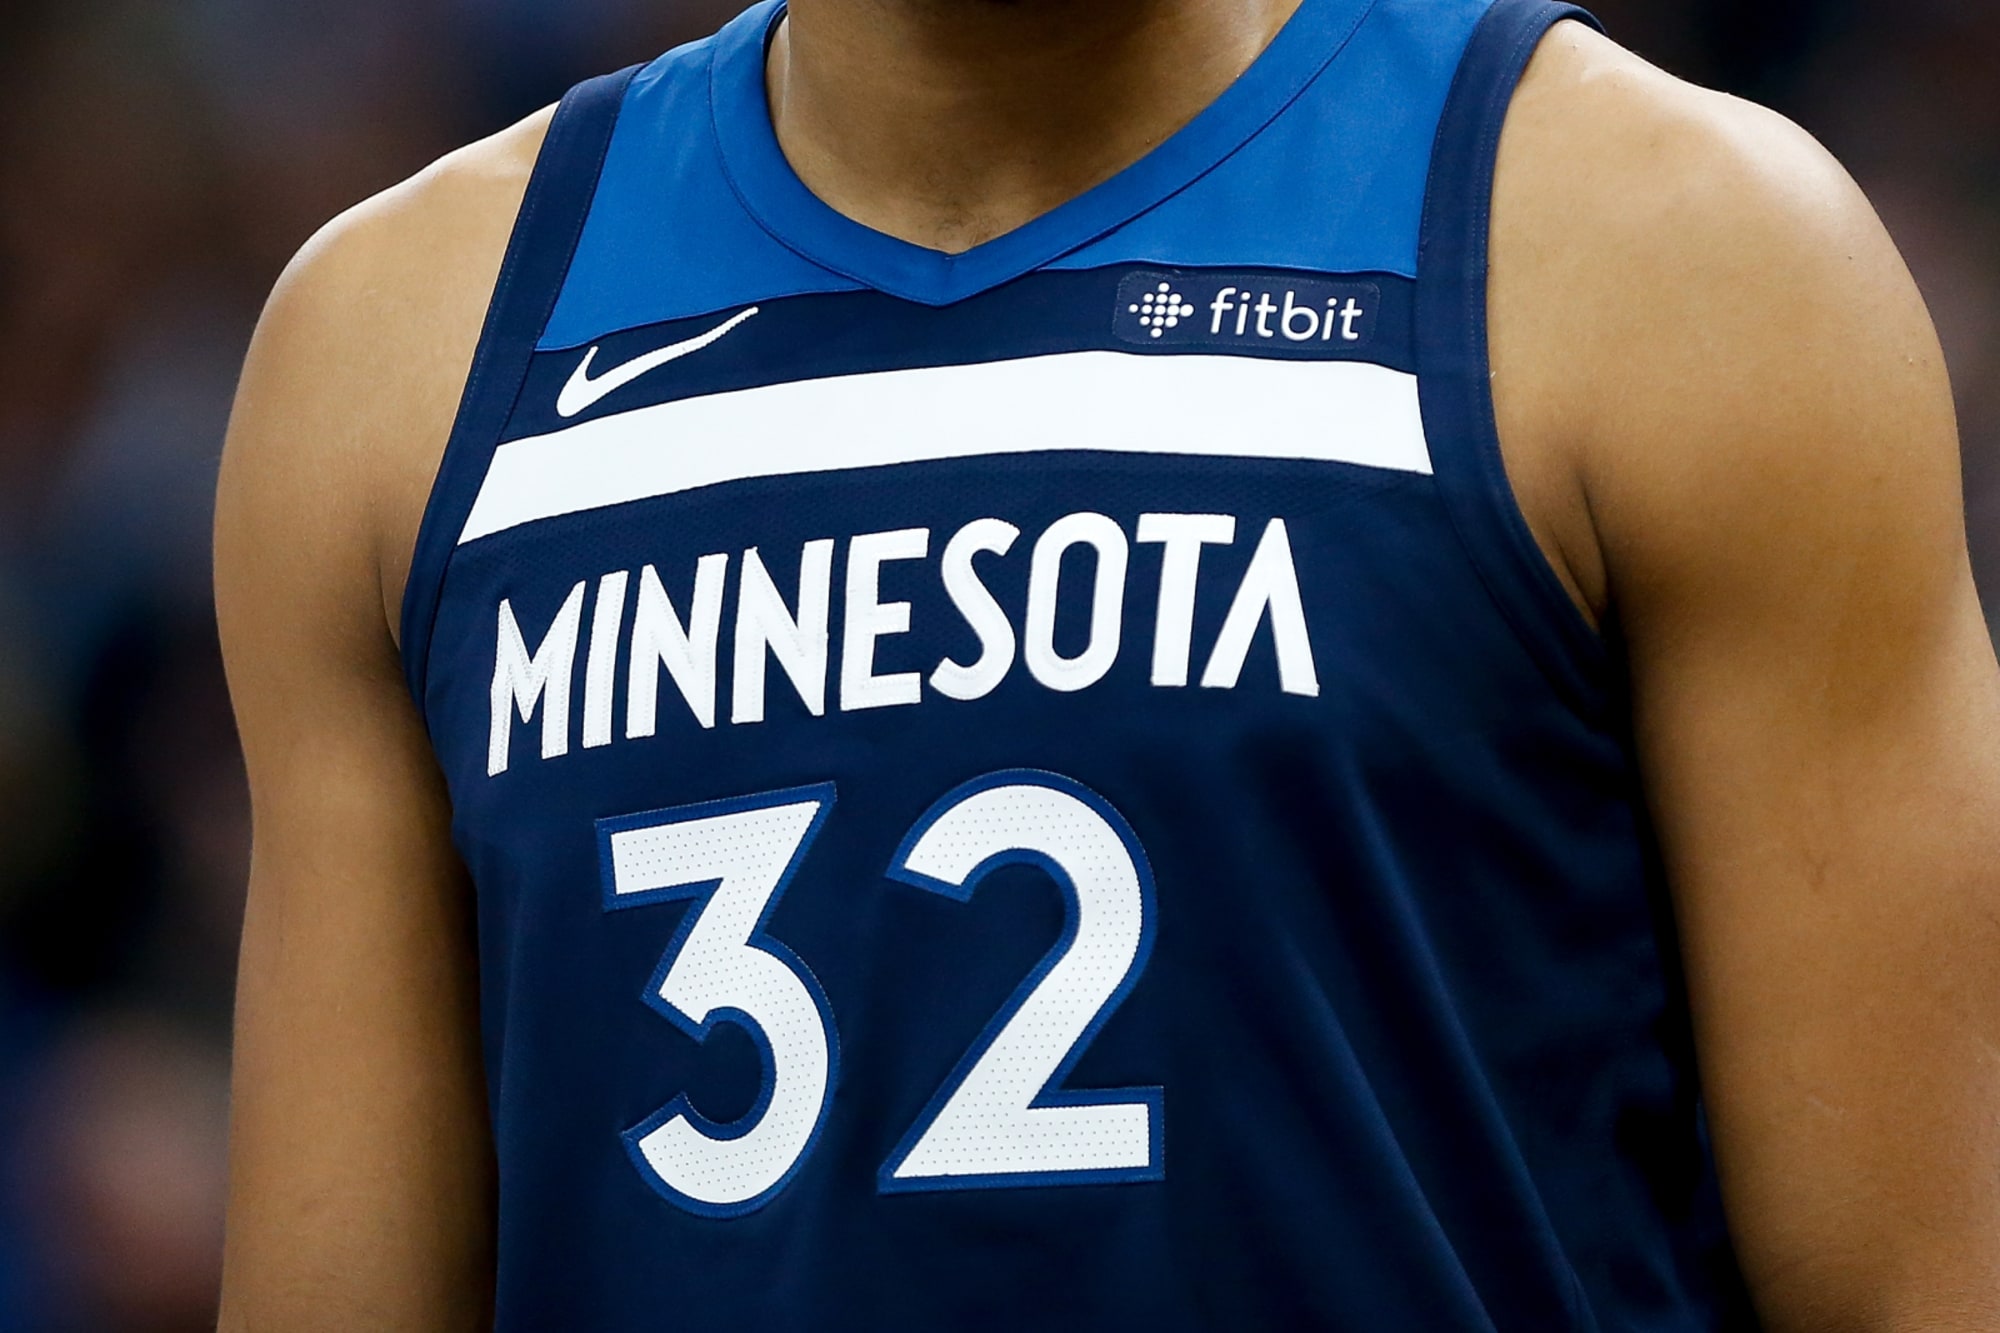 The Minnesota Timberwolves will wear Fitbit ads on their jerseys